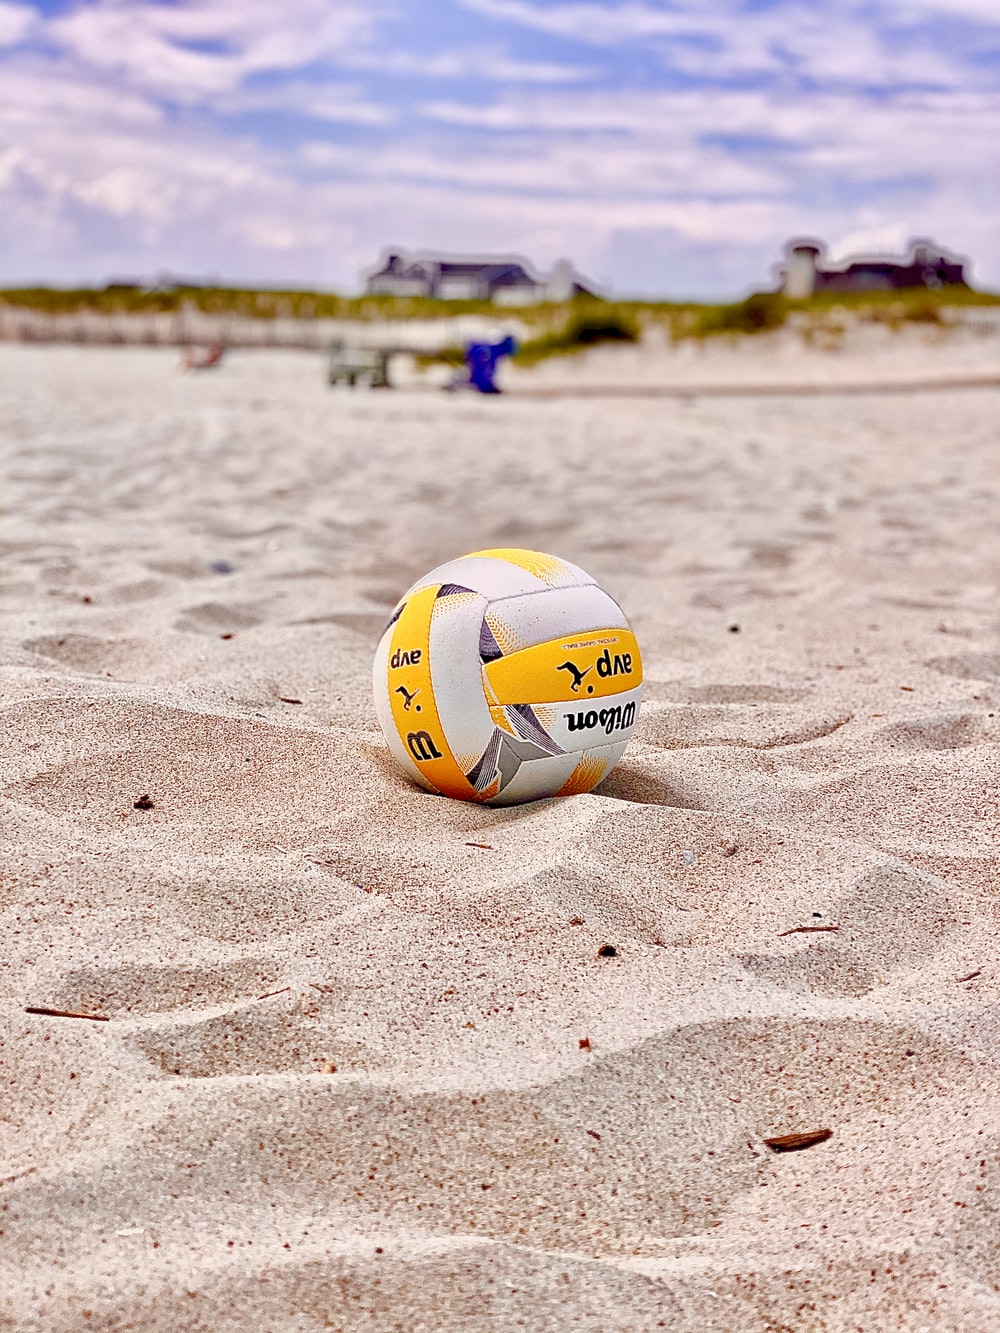 Beach Ball Picture. Download Free Image